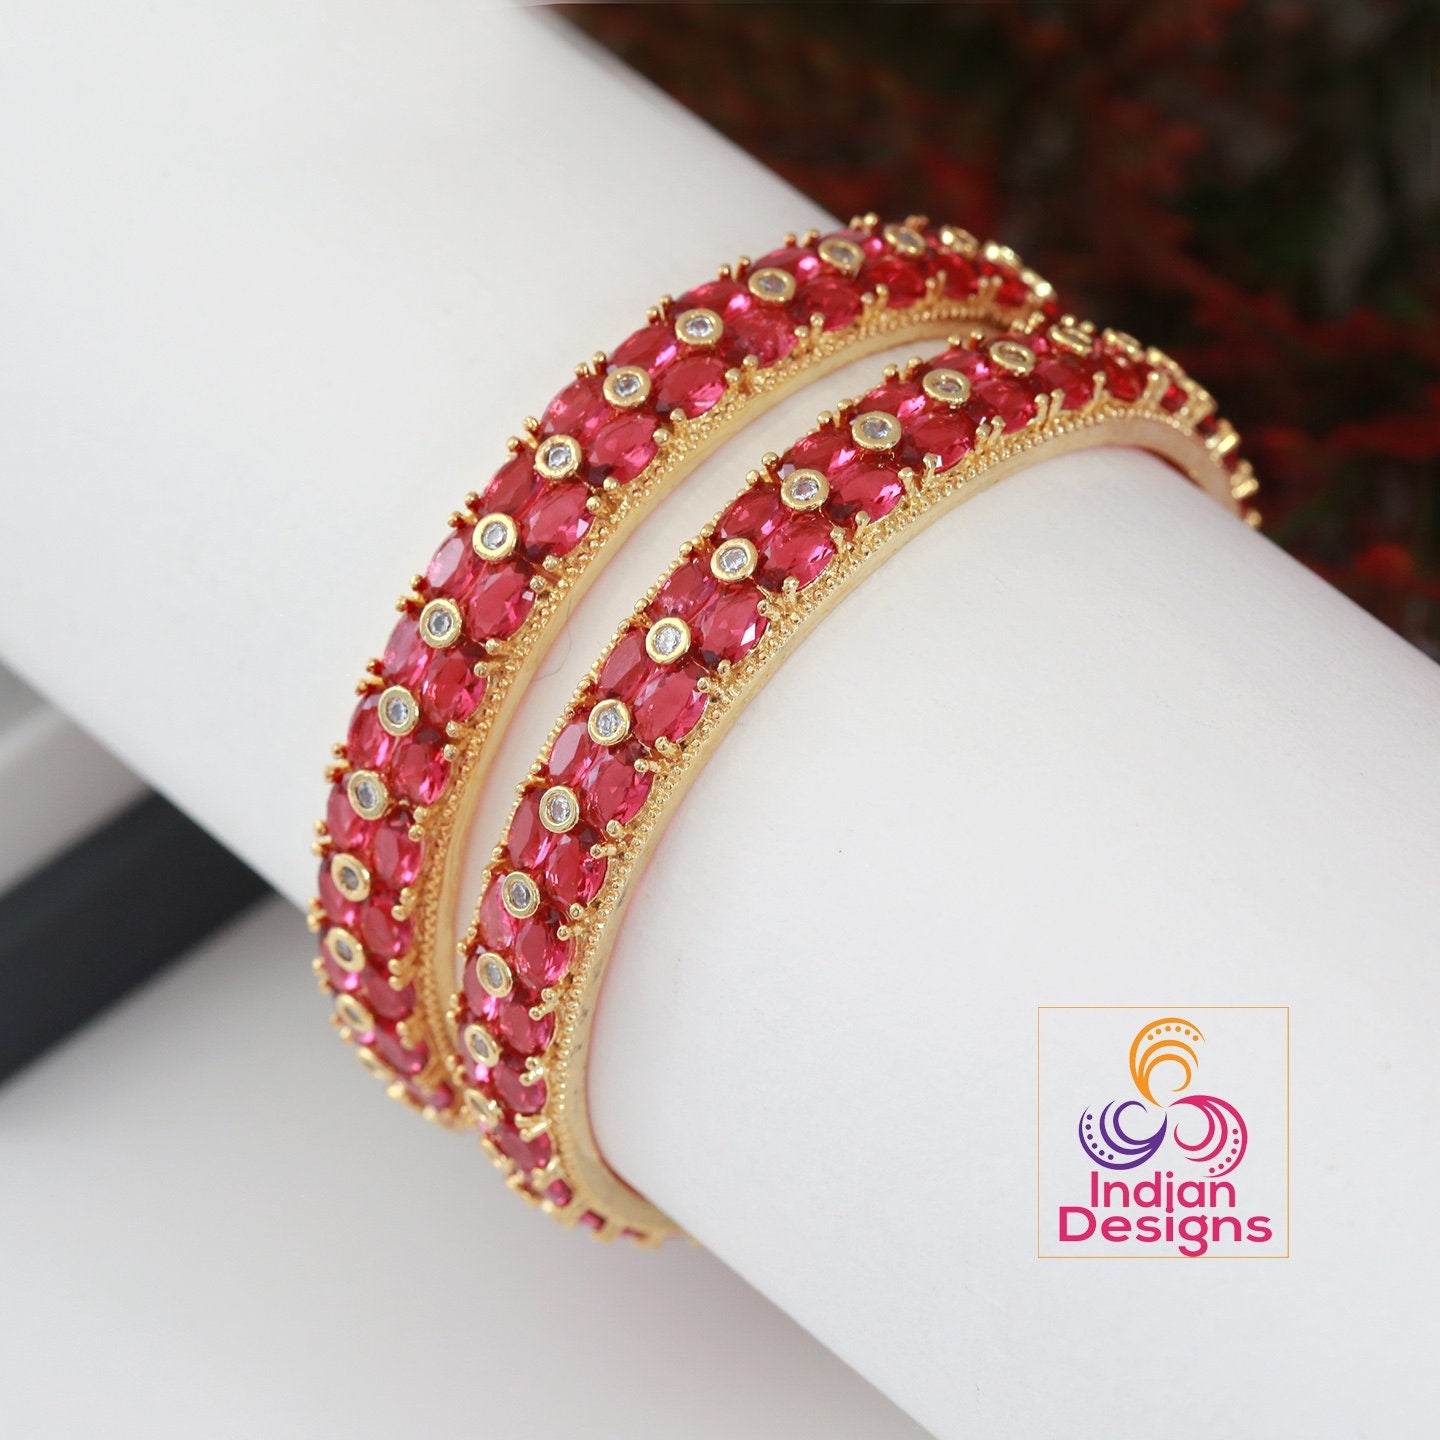 2.6 Rose Gold American Diamond bangles | Pair of Cz stone bangles | Pink Cz AD bangles | Jewellery stone bangles for saree | Indian Designs